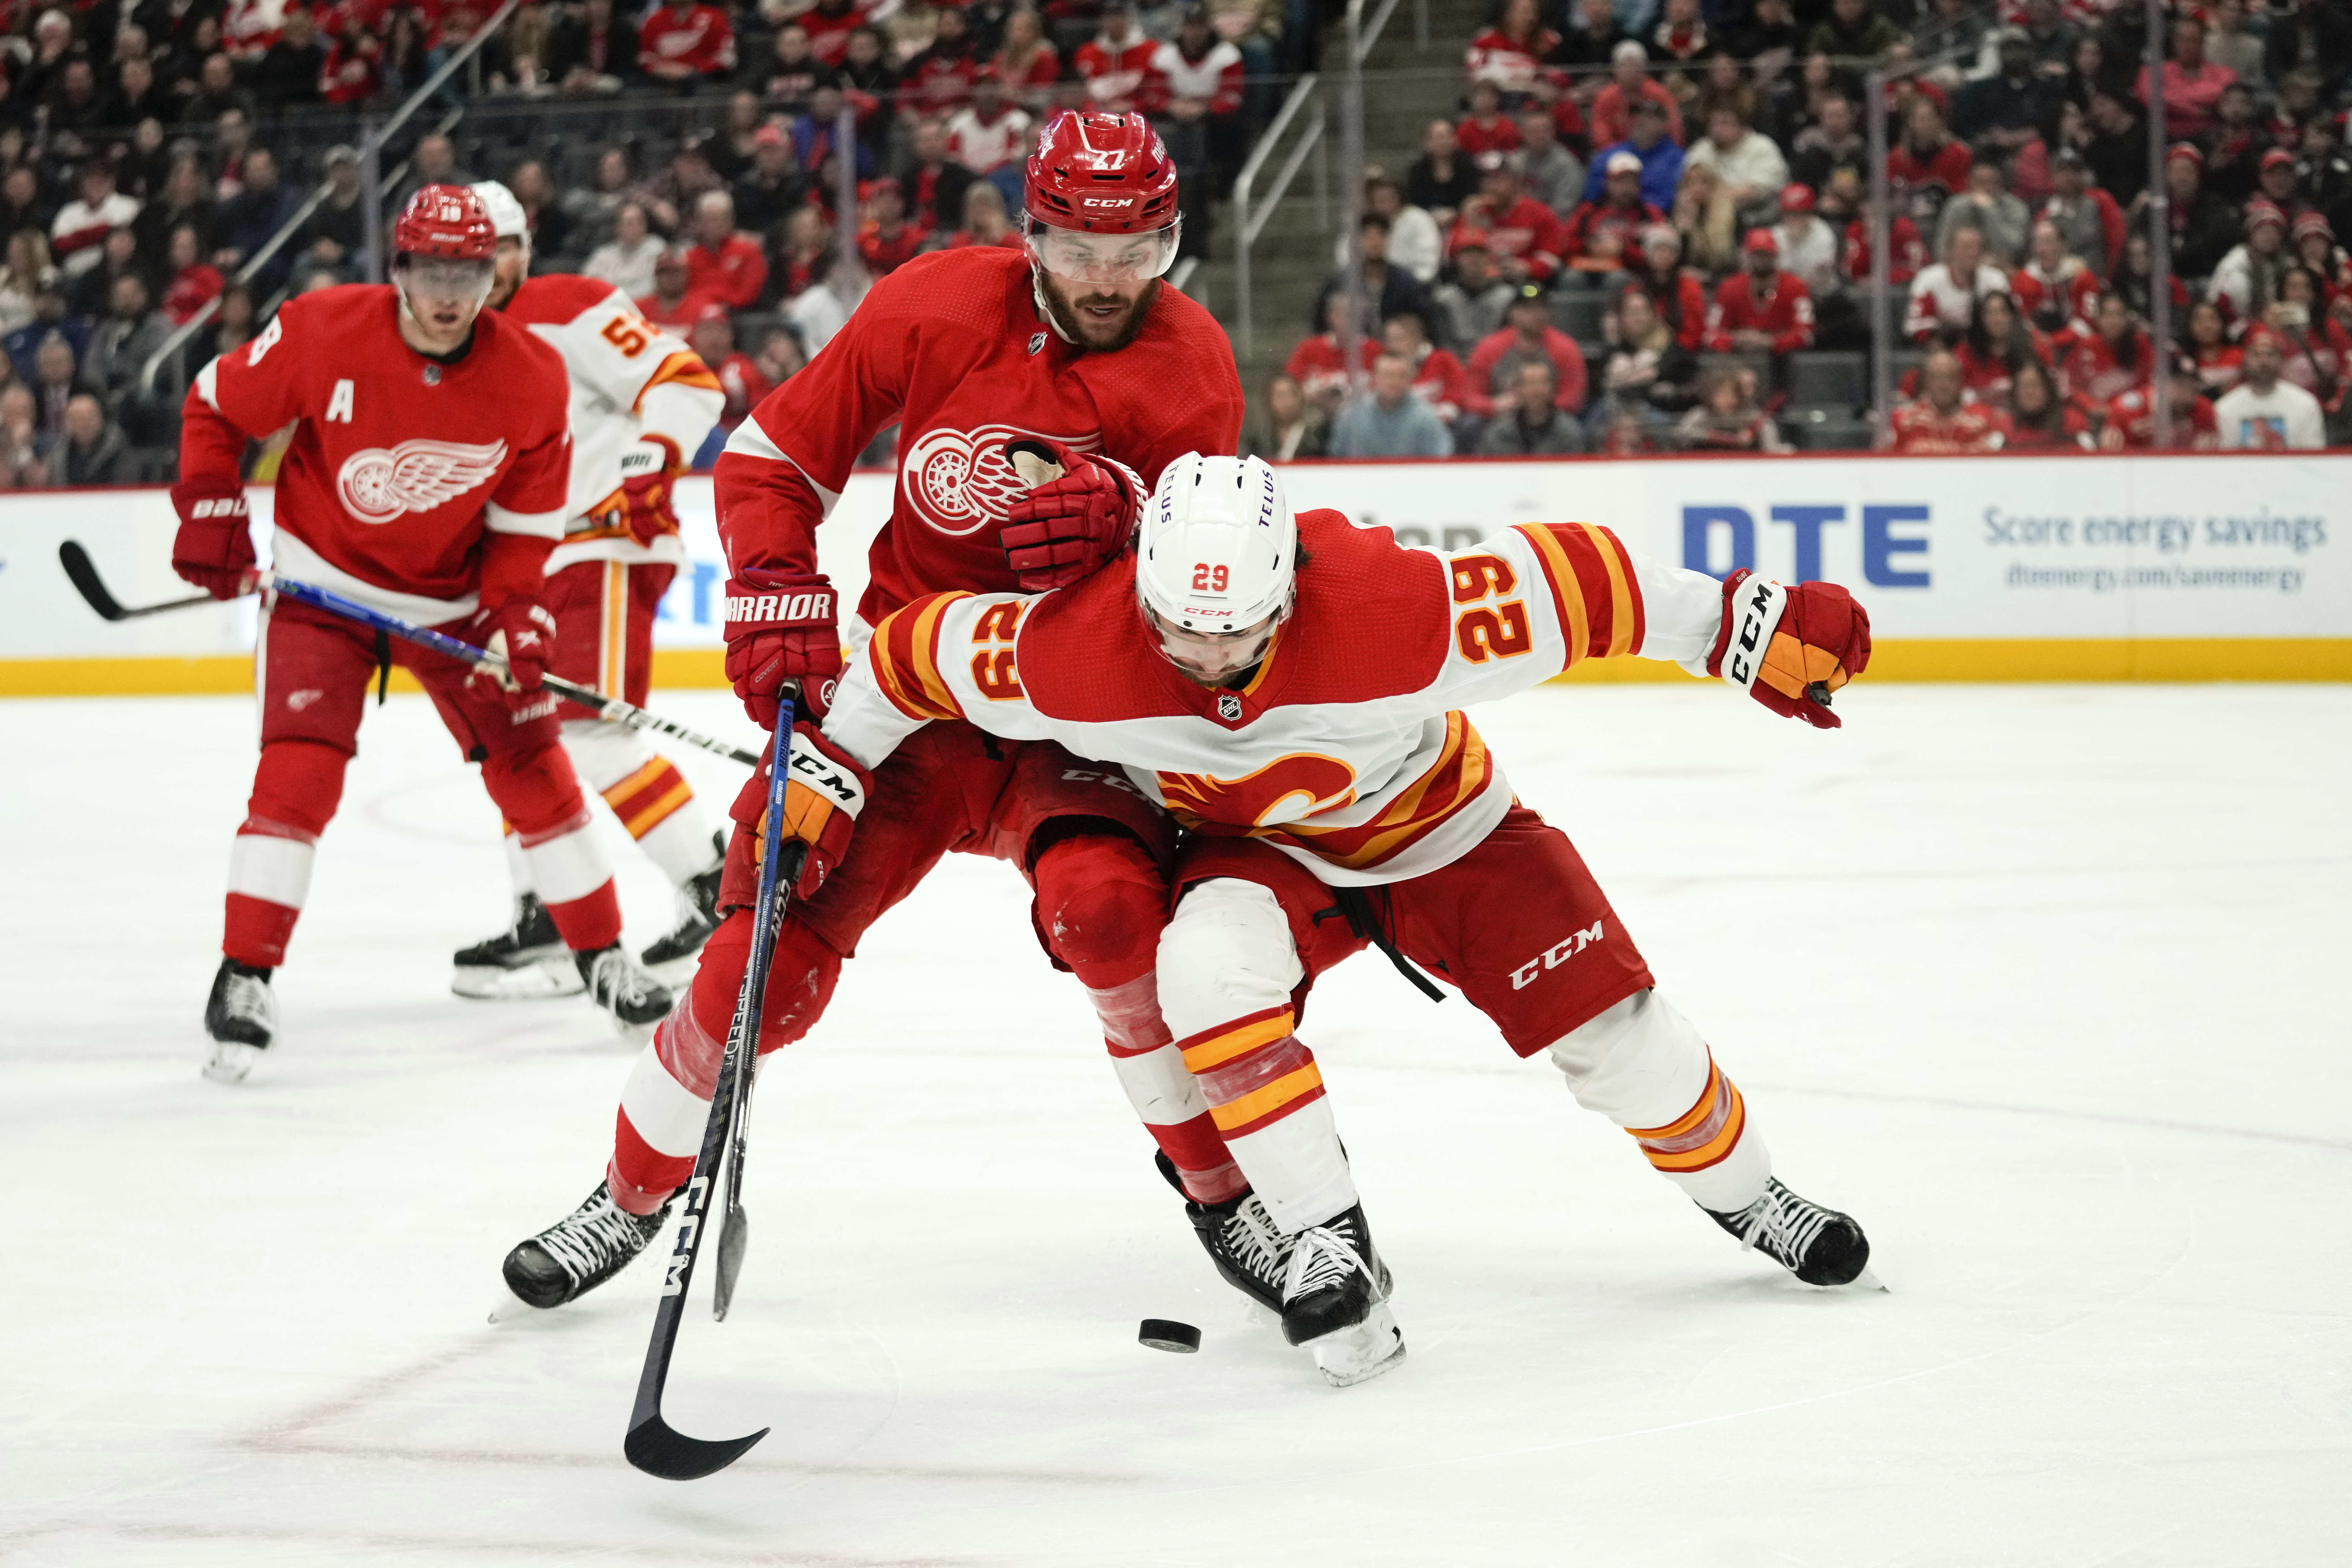 Red Wings Fall To Lightning 7-6 In OT As Bertuzzi Scores 4 Goals